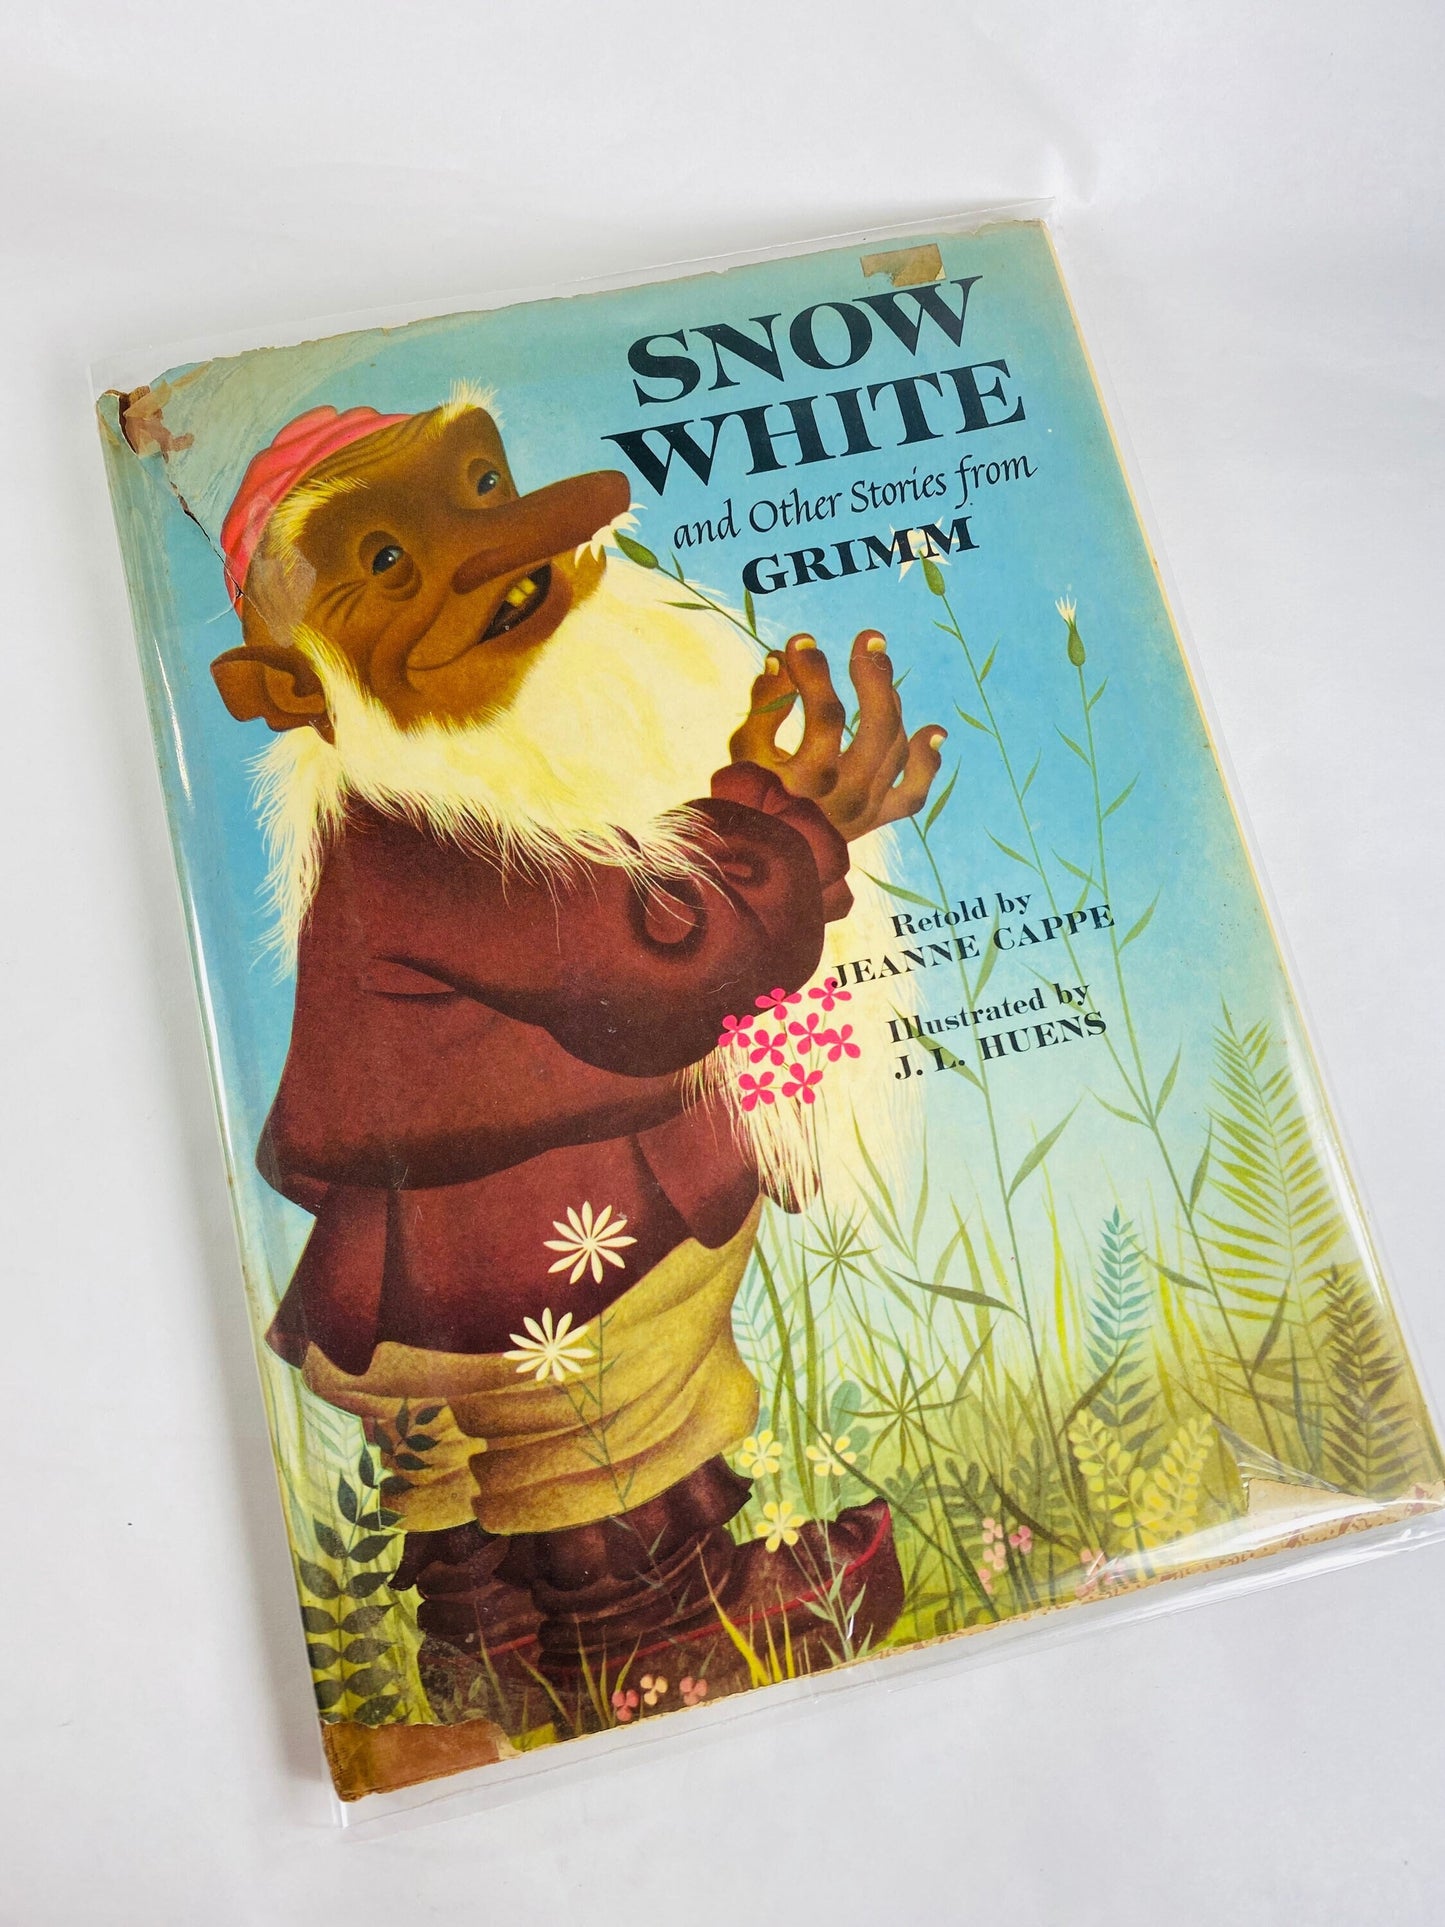 Snow White OVERSIZED vintage children’s book circa 1957 with dust jacket EARLY PRINTING Cappe Collectible princess nursery decor